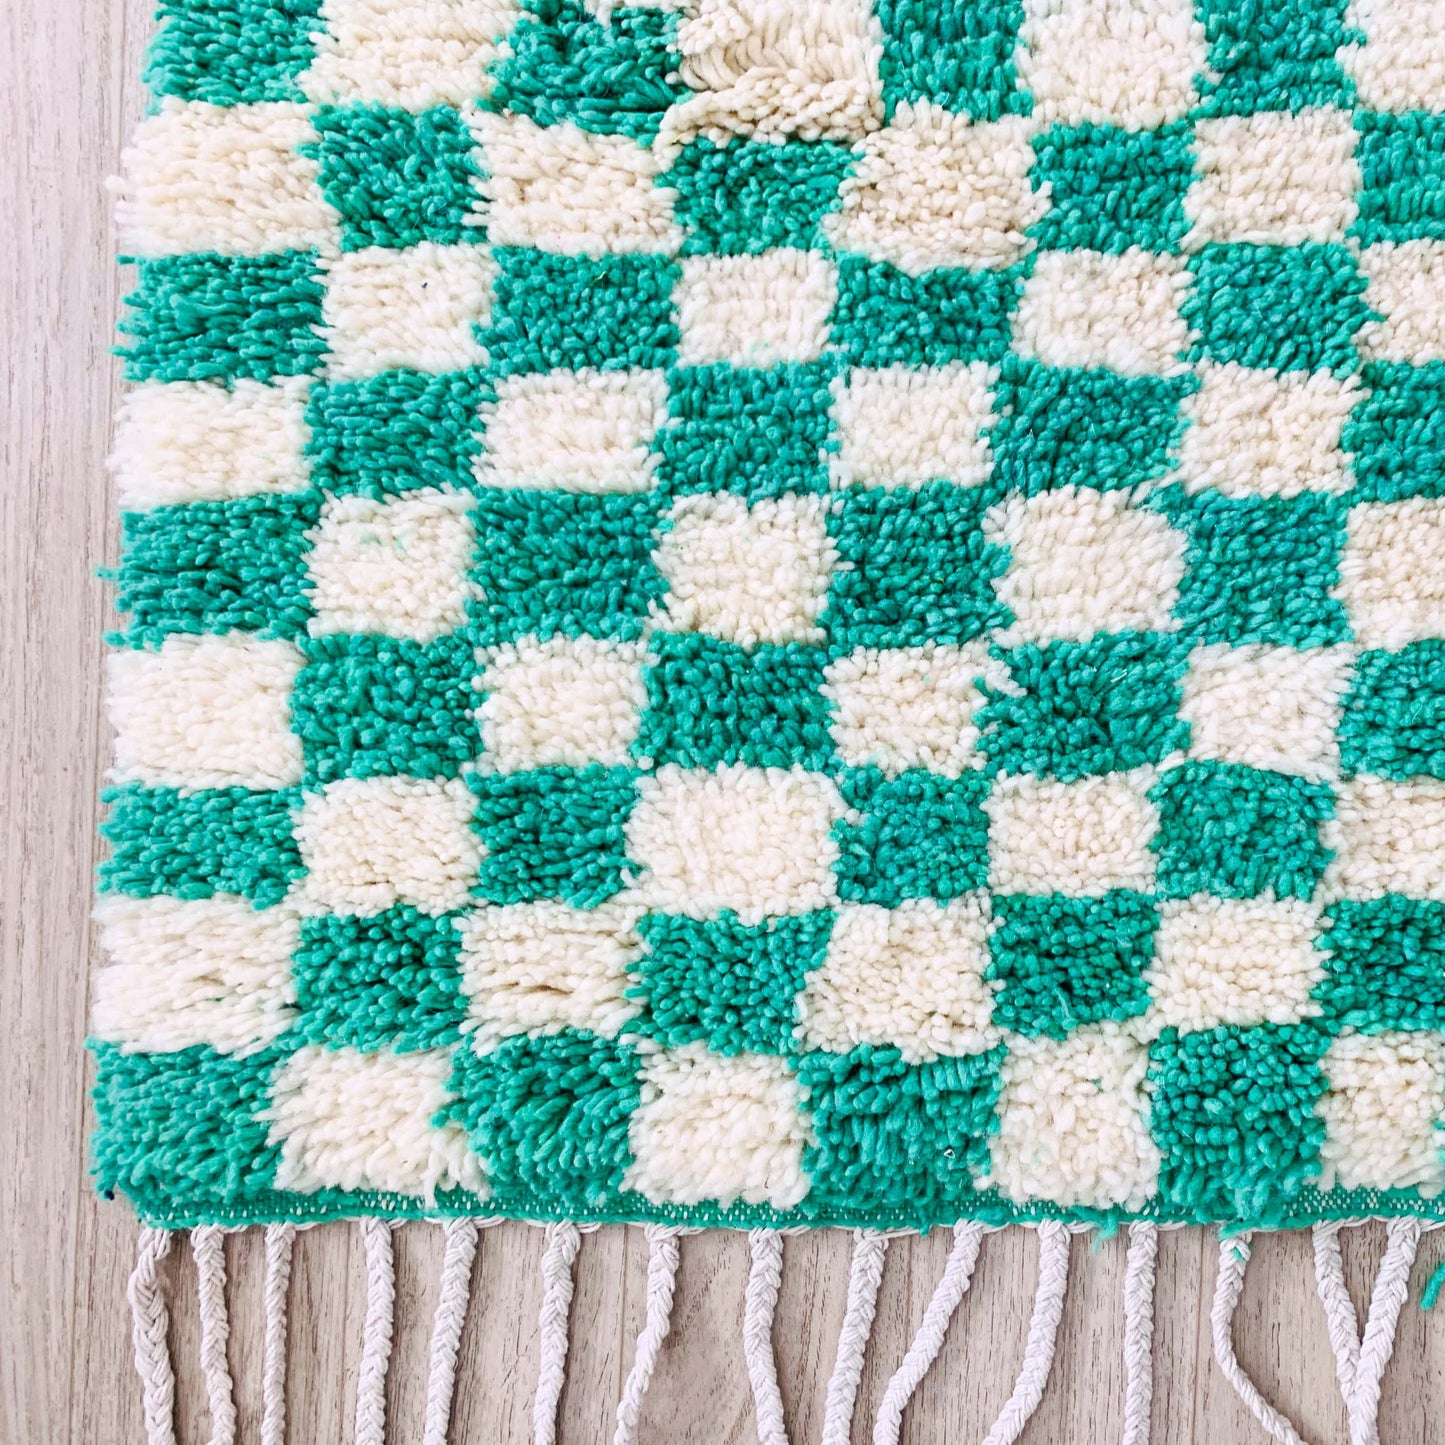 edge-of-green-and-white-checkered-rug